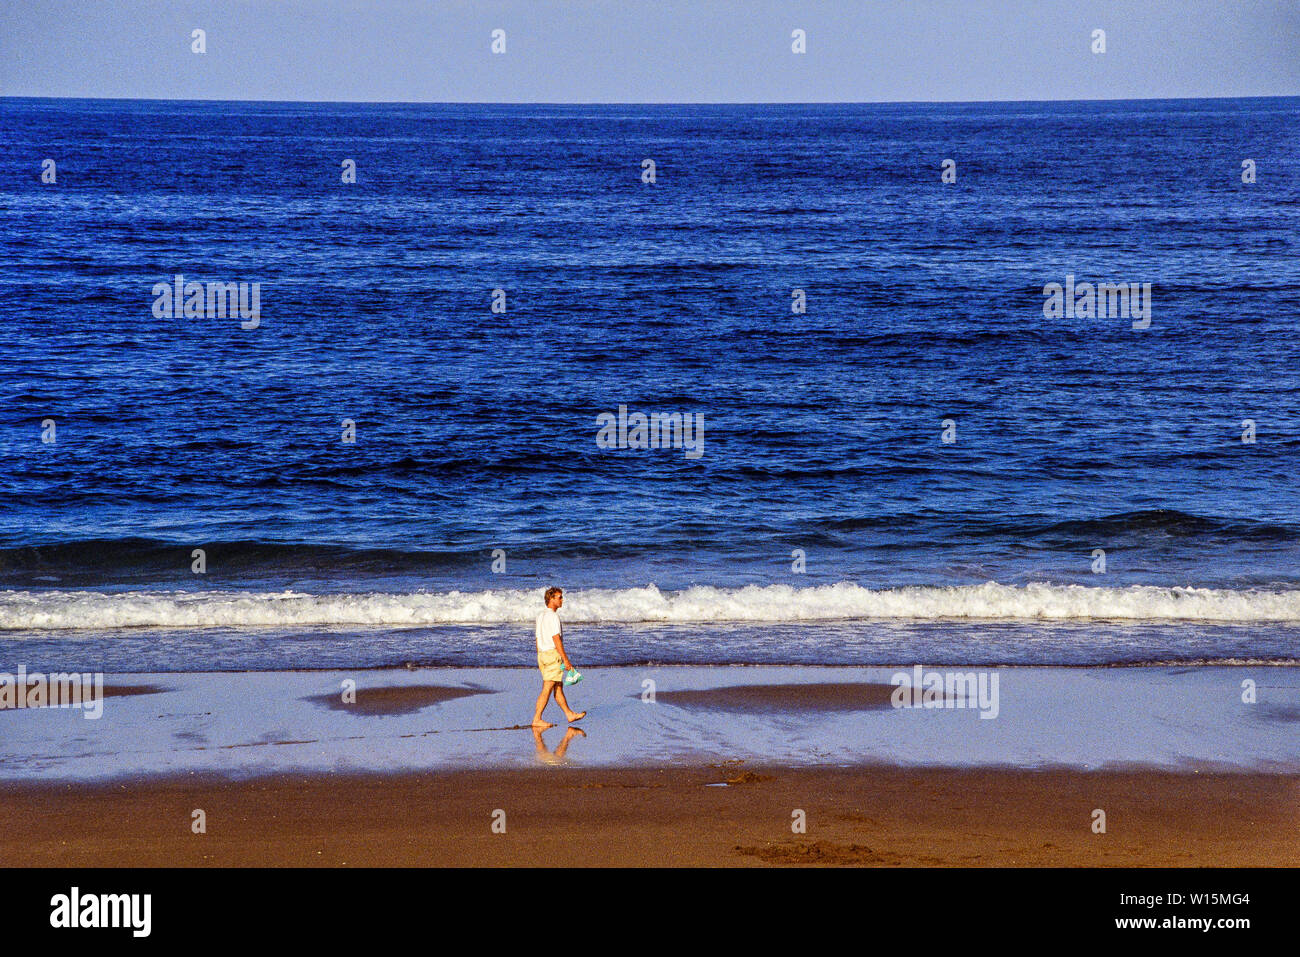 New Zealand, North Island. Lone person walks along deserted beach. Photo taken November 1989. Photo: © Simon Grosset. Archive: Image digitised from an Stock Photo